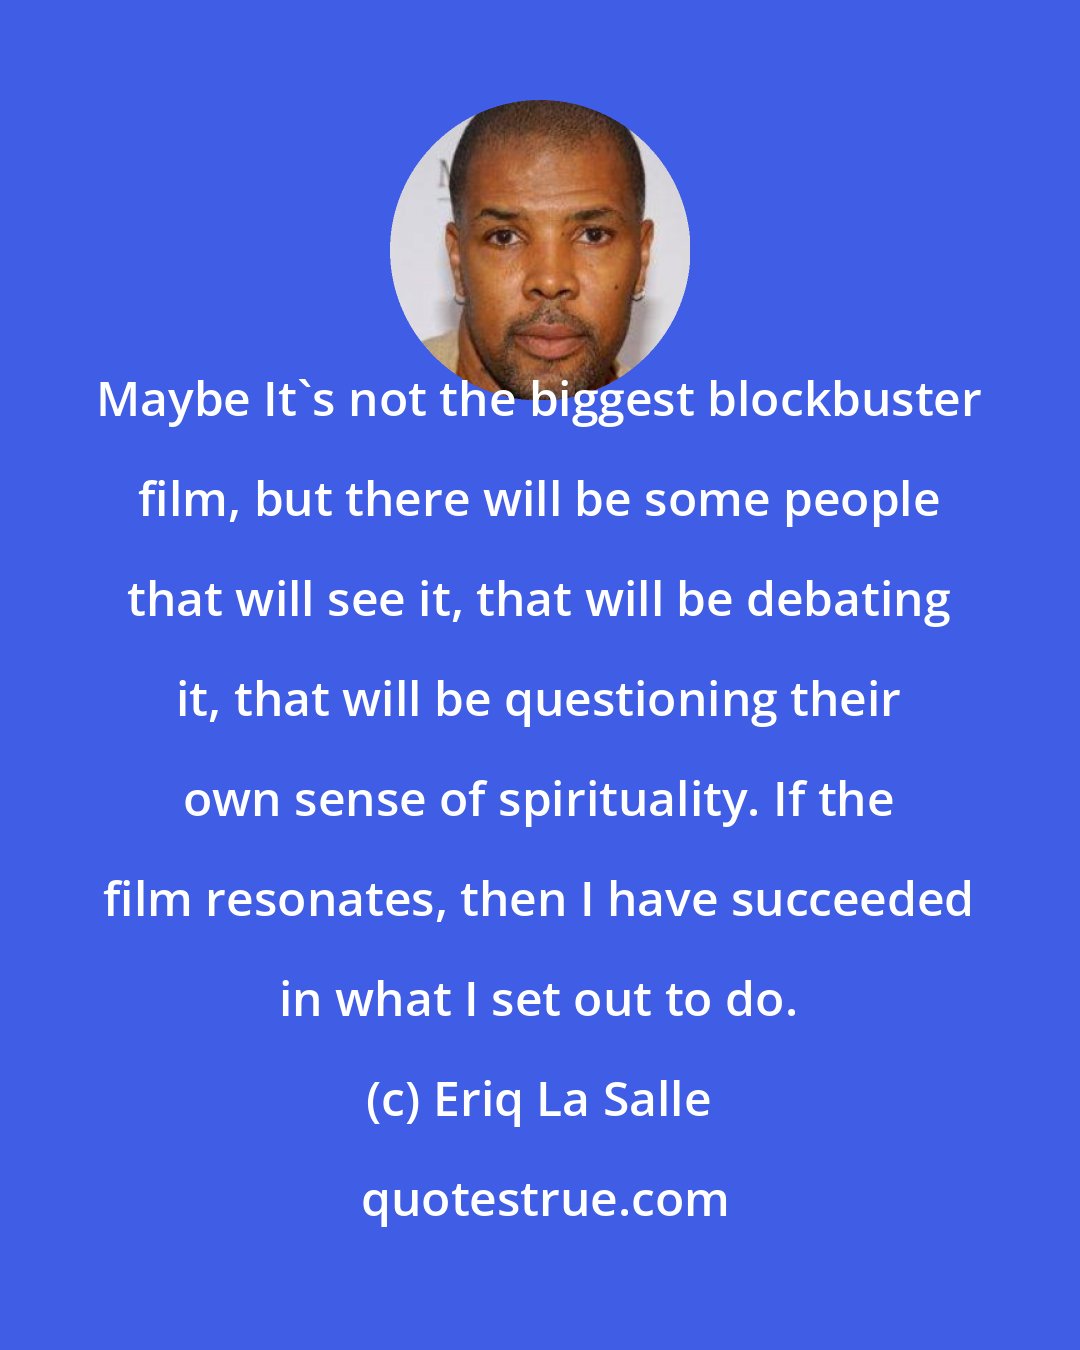 Eriq La Salle: Maybe It's not the biggest blockbuster film, but there will be some people that will see it, that will be debating it, that will be questioning their own sense of spirituality. If the film resonates, then I have succeeded in what I set out to do.